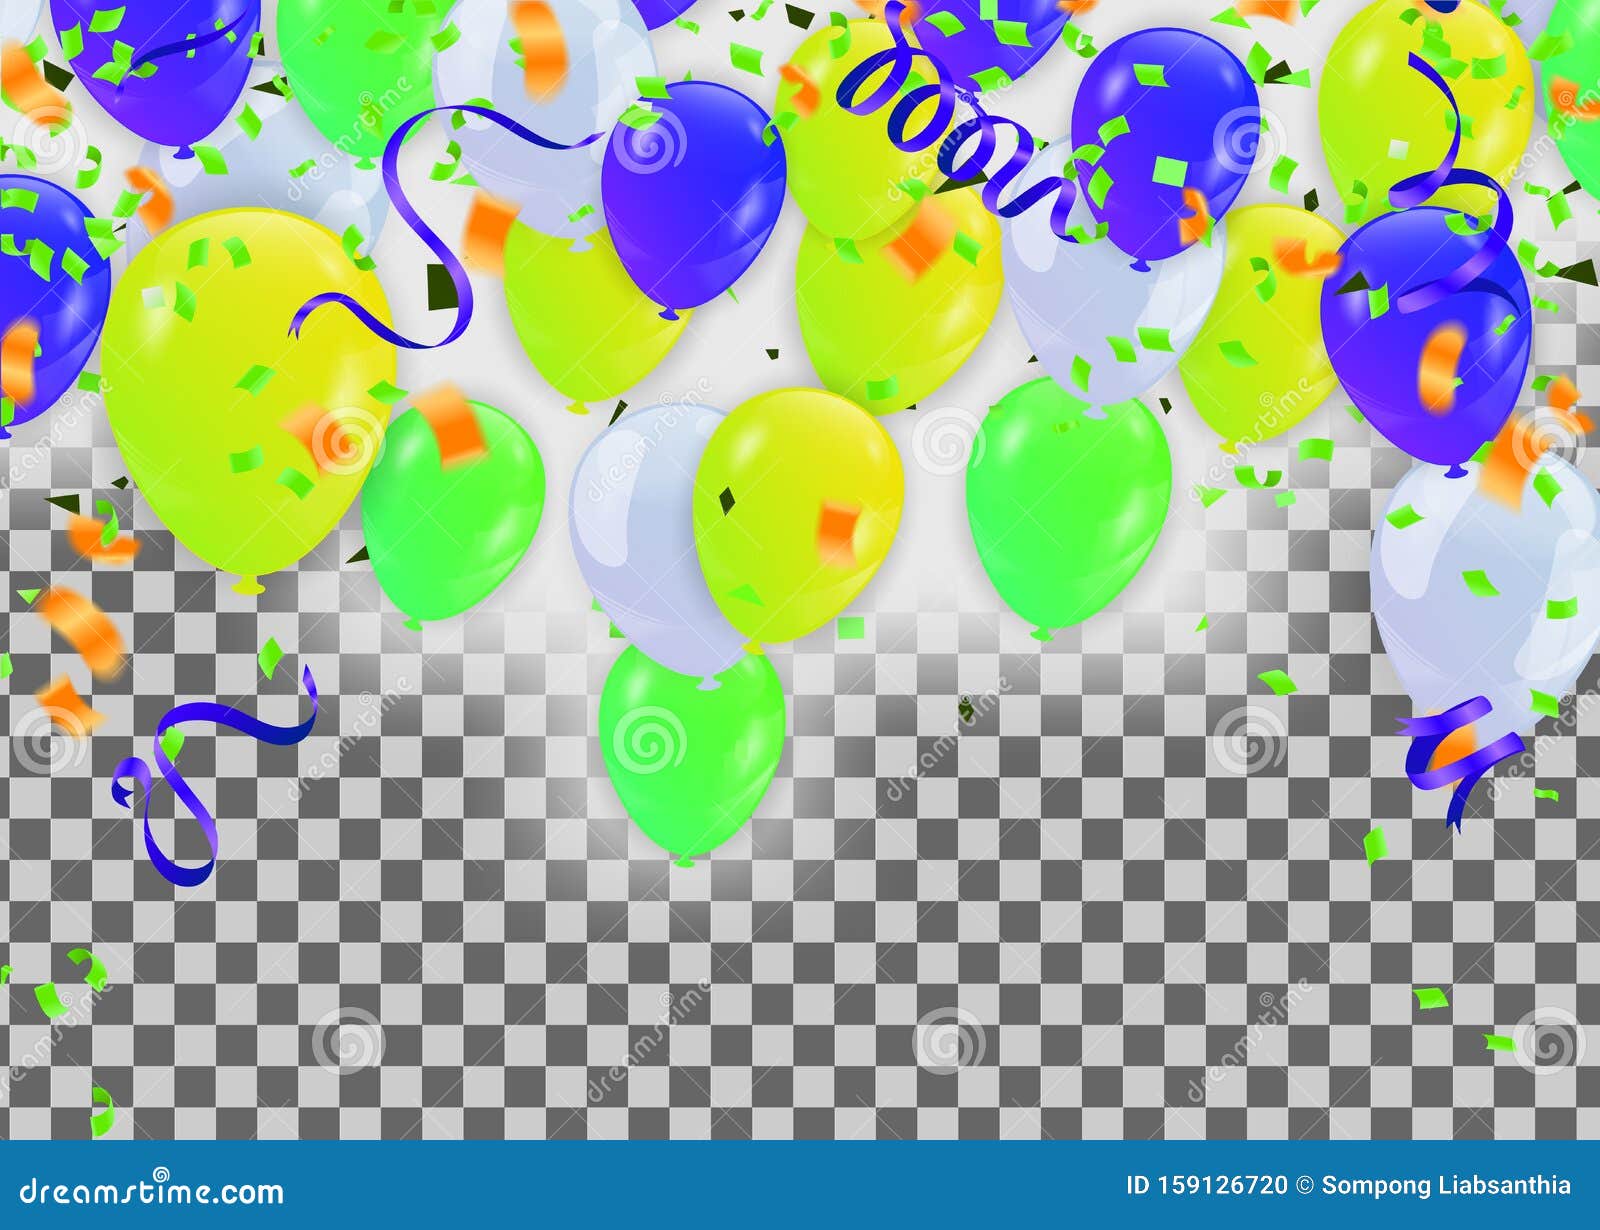 Grand Opening English Ceremony With Ballons And Confetti Background, Grand  Opening, Ballons, Background Background Image And Wallpaper for Free  Download